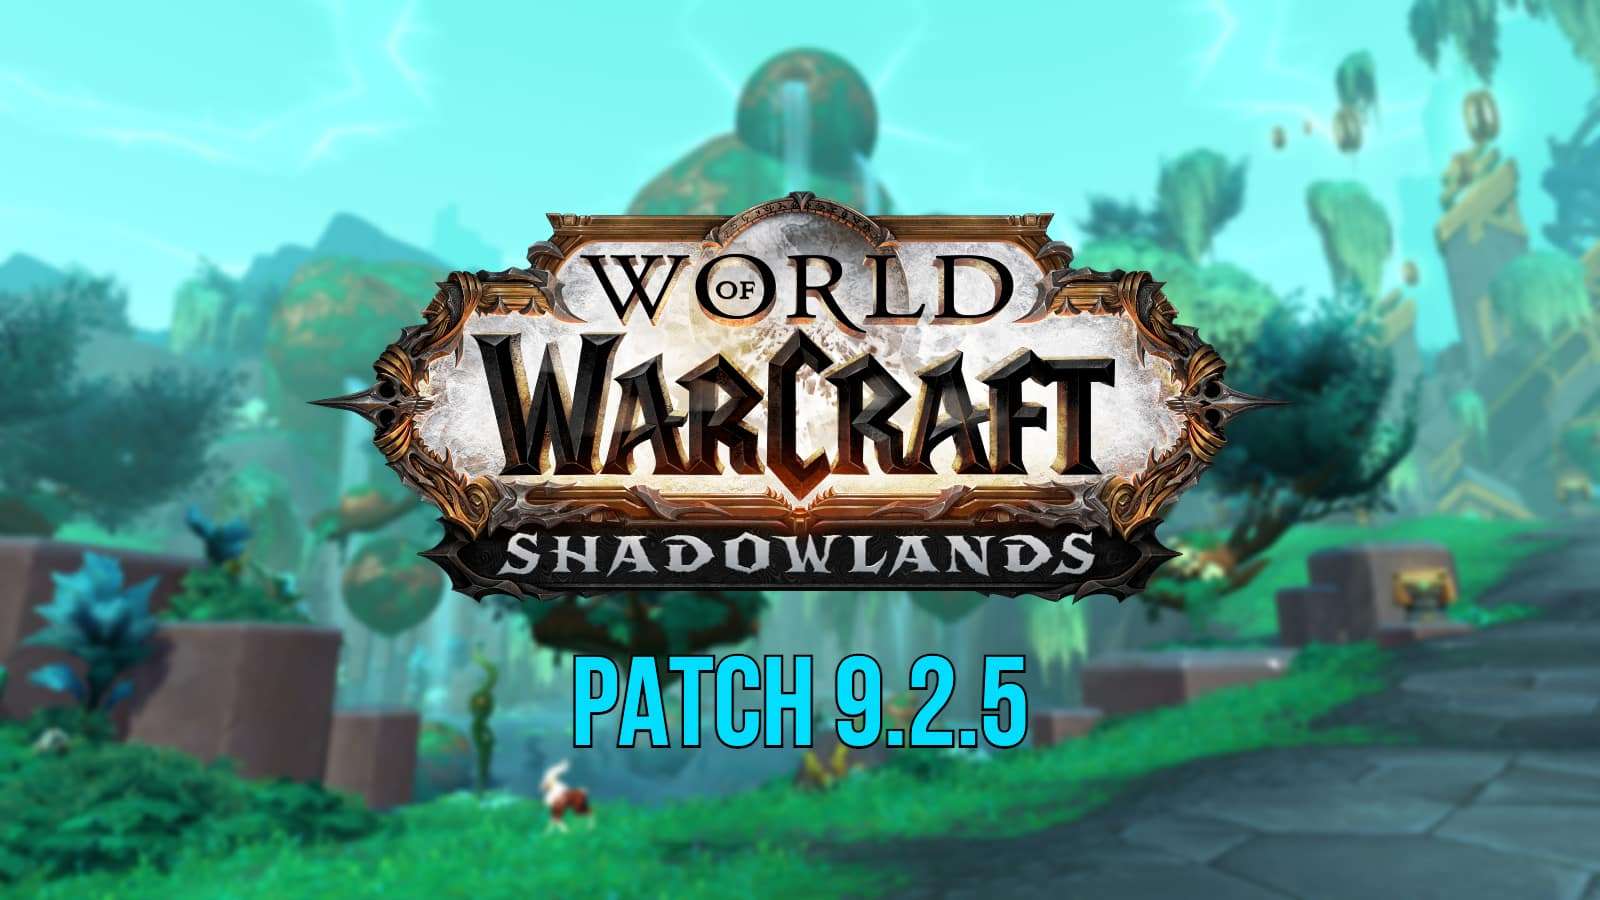 world of warcraft wow shadowlands patch 9.2.5 image